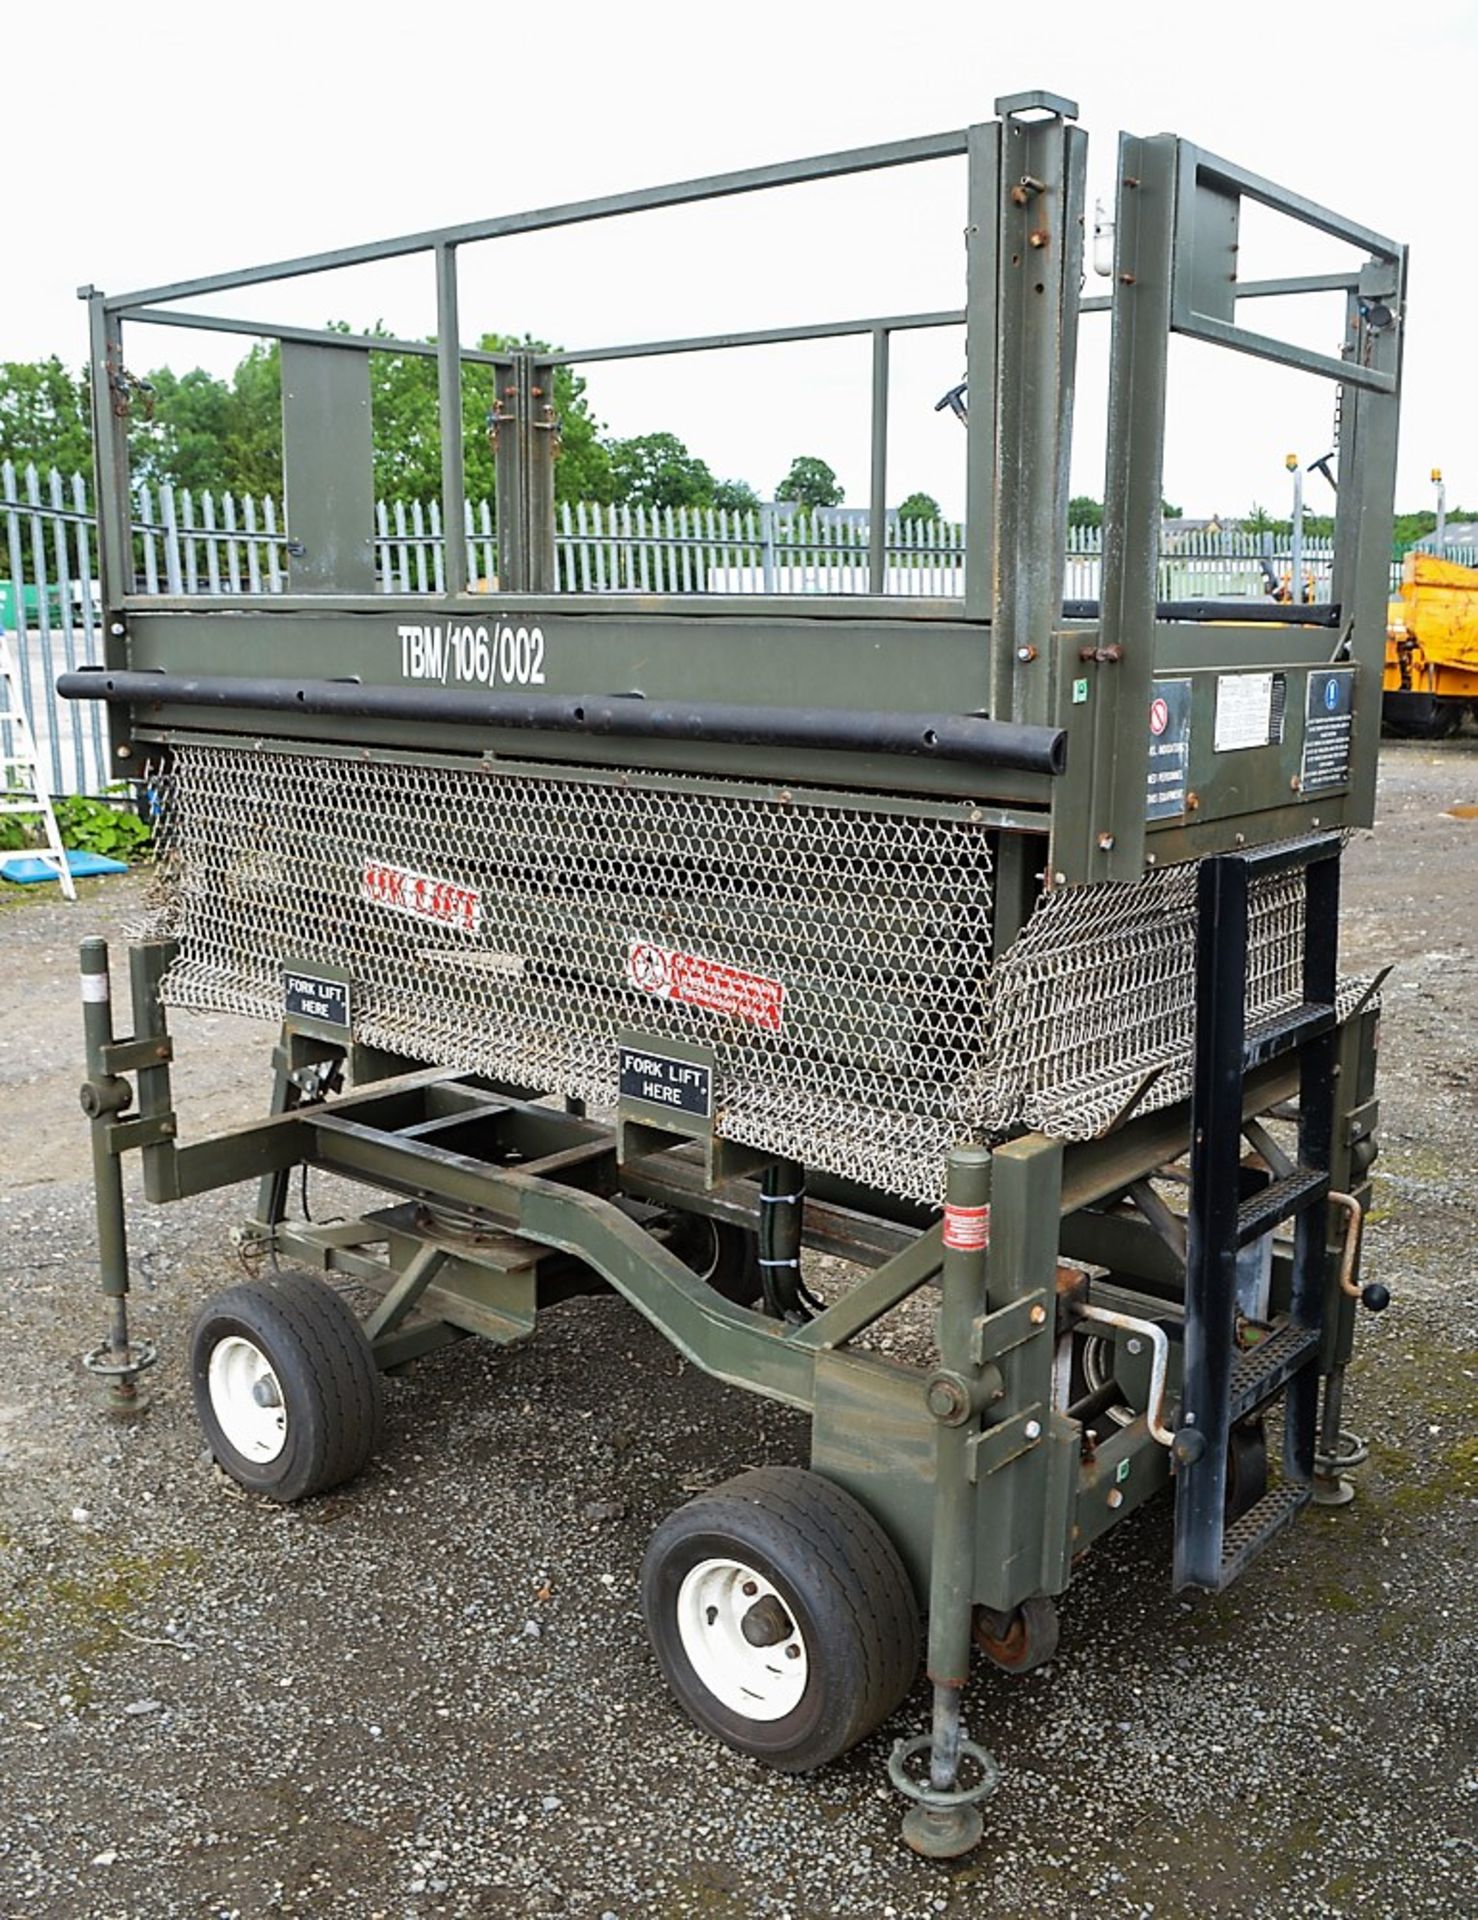 UK Lift manual hydraulic site tow mobile access platform (Ex MOD) - Image 4 of 5